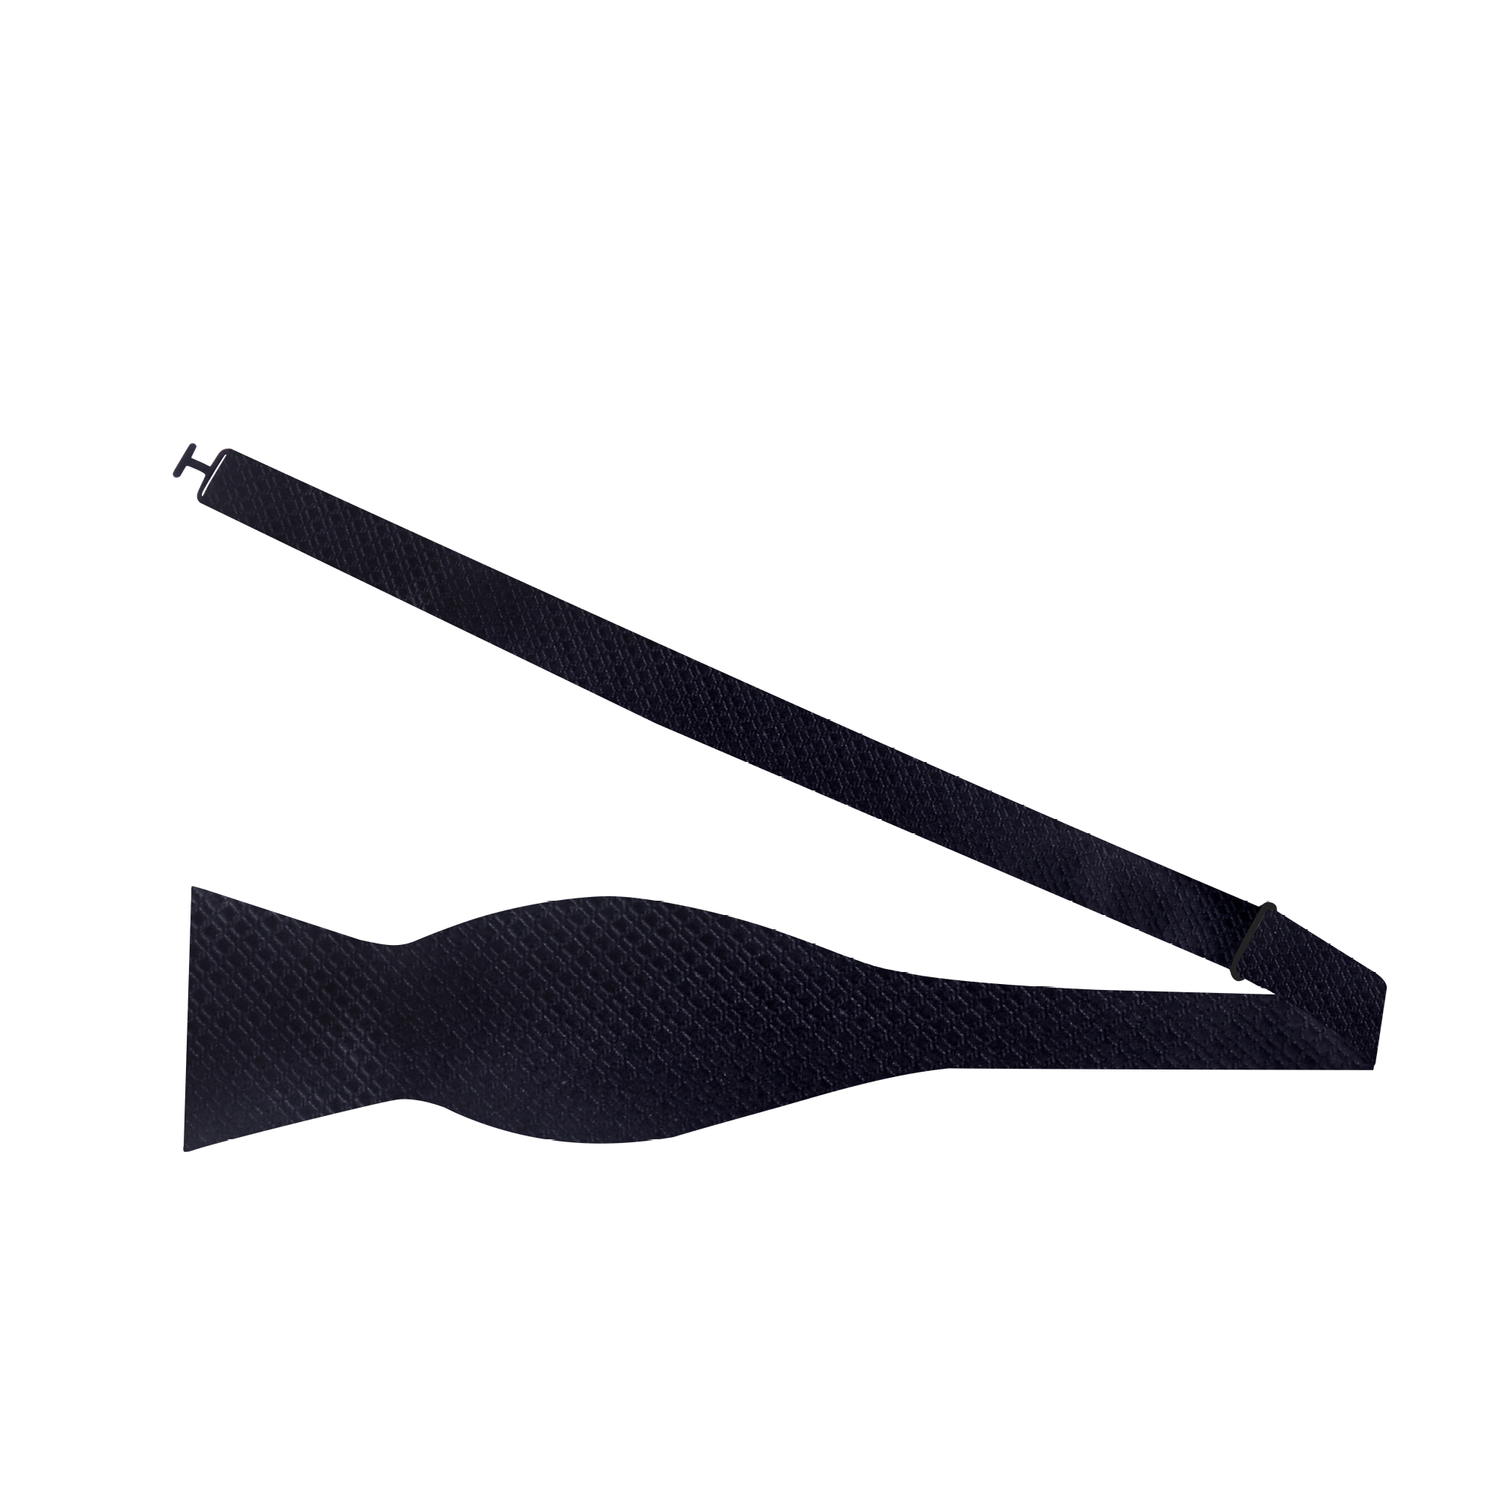 Self Tie: A Solid Black With Small Check Texture Pattern Silk Self Tie Bow Tie